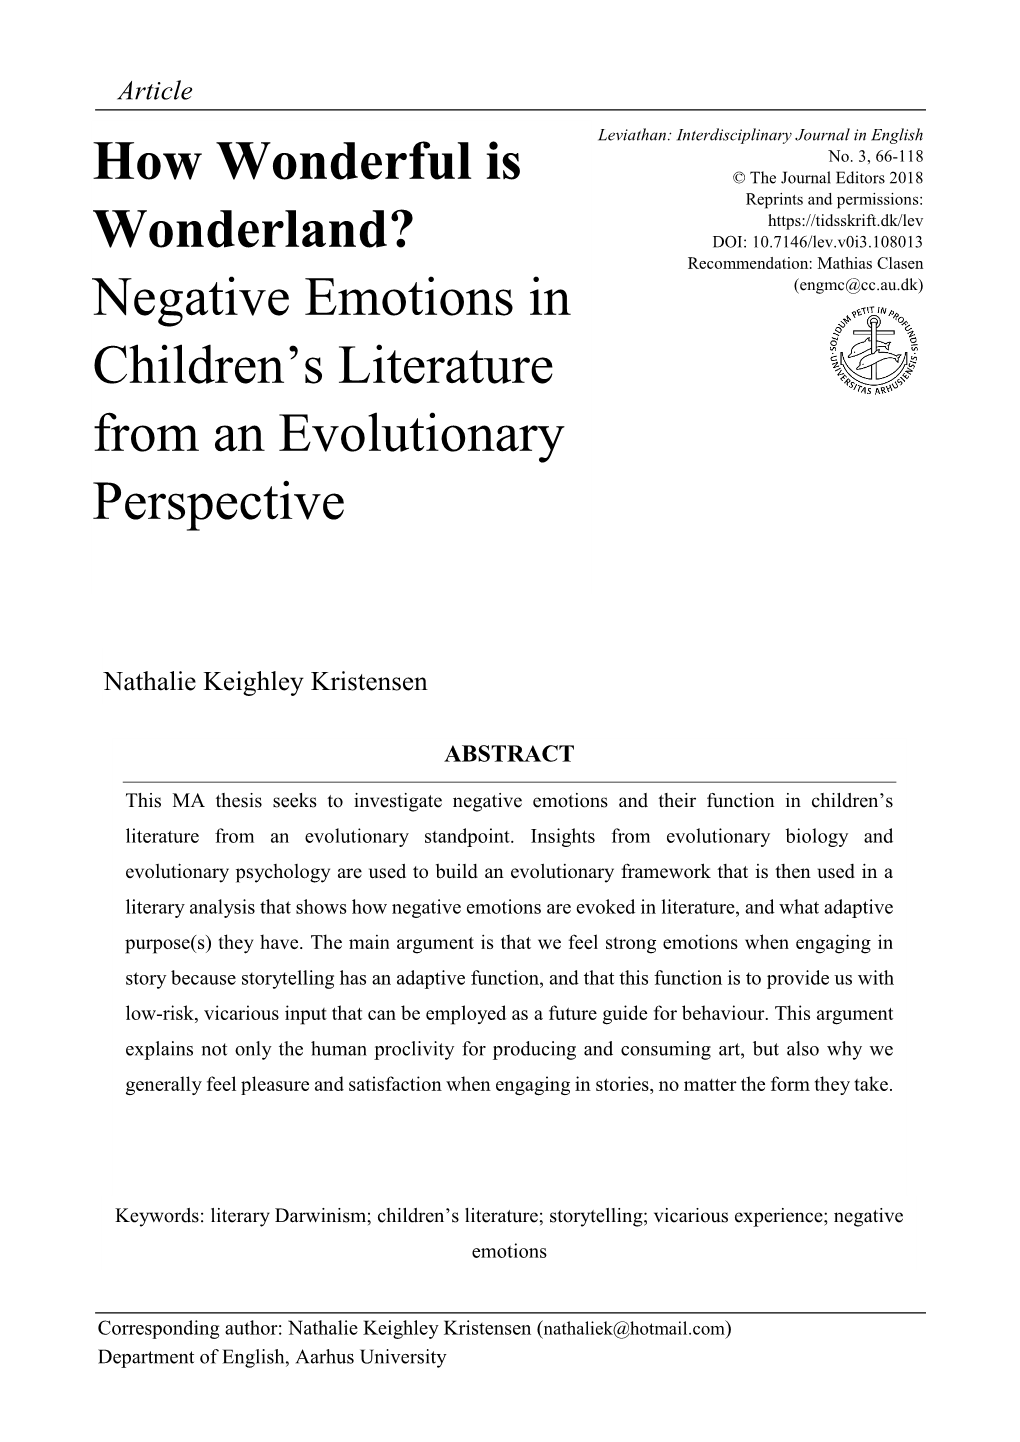 Negative Emotions in Children's Literature from an Evolutionary